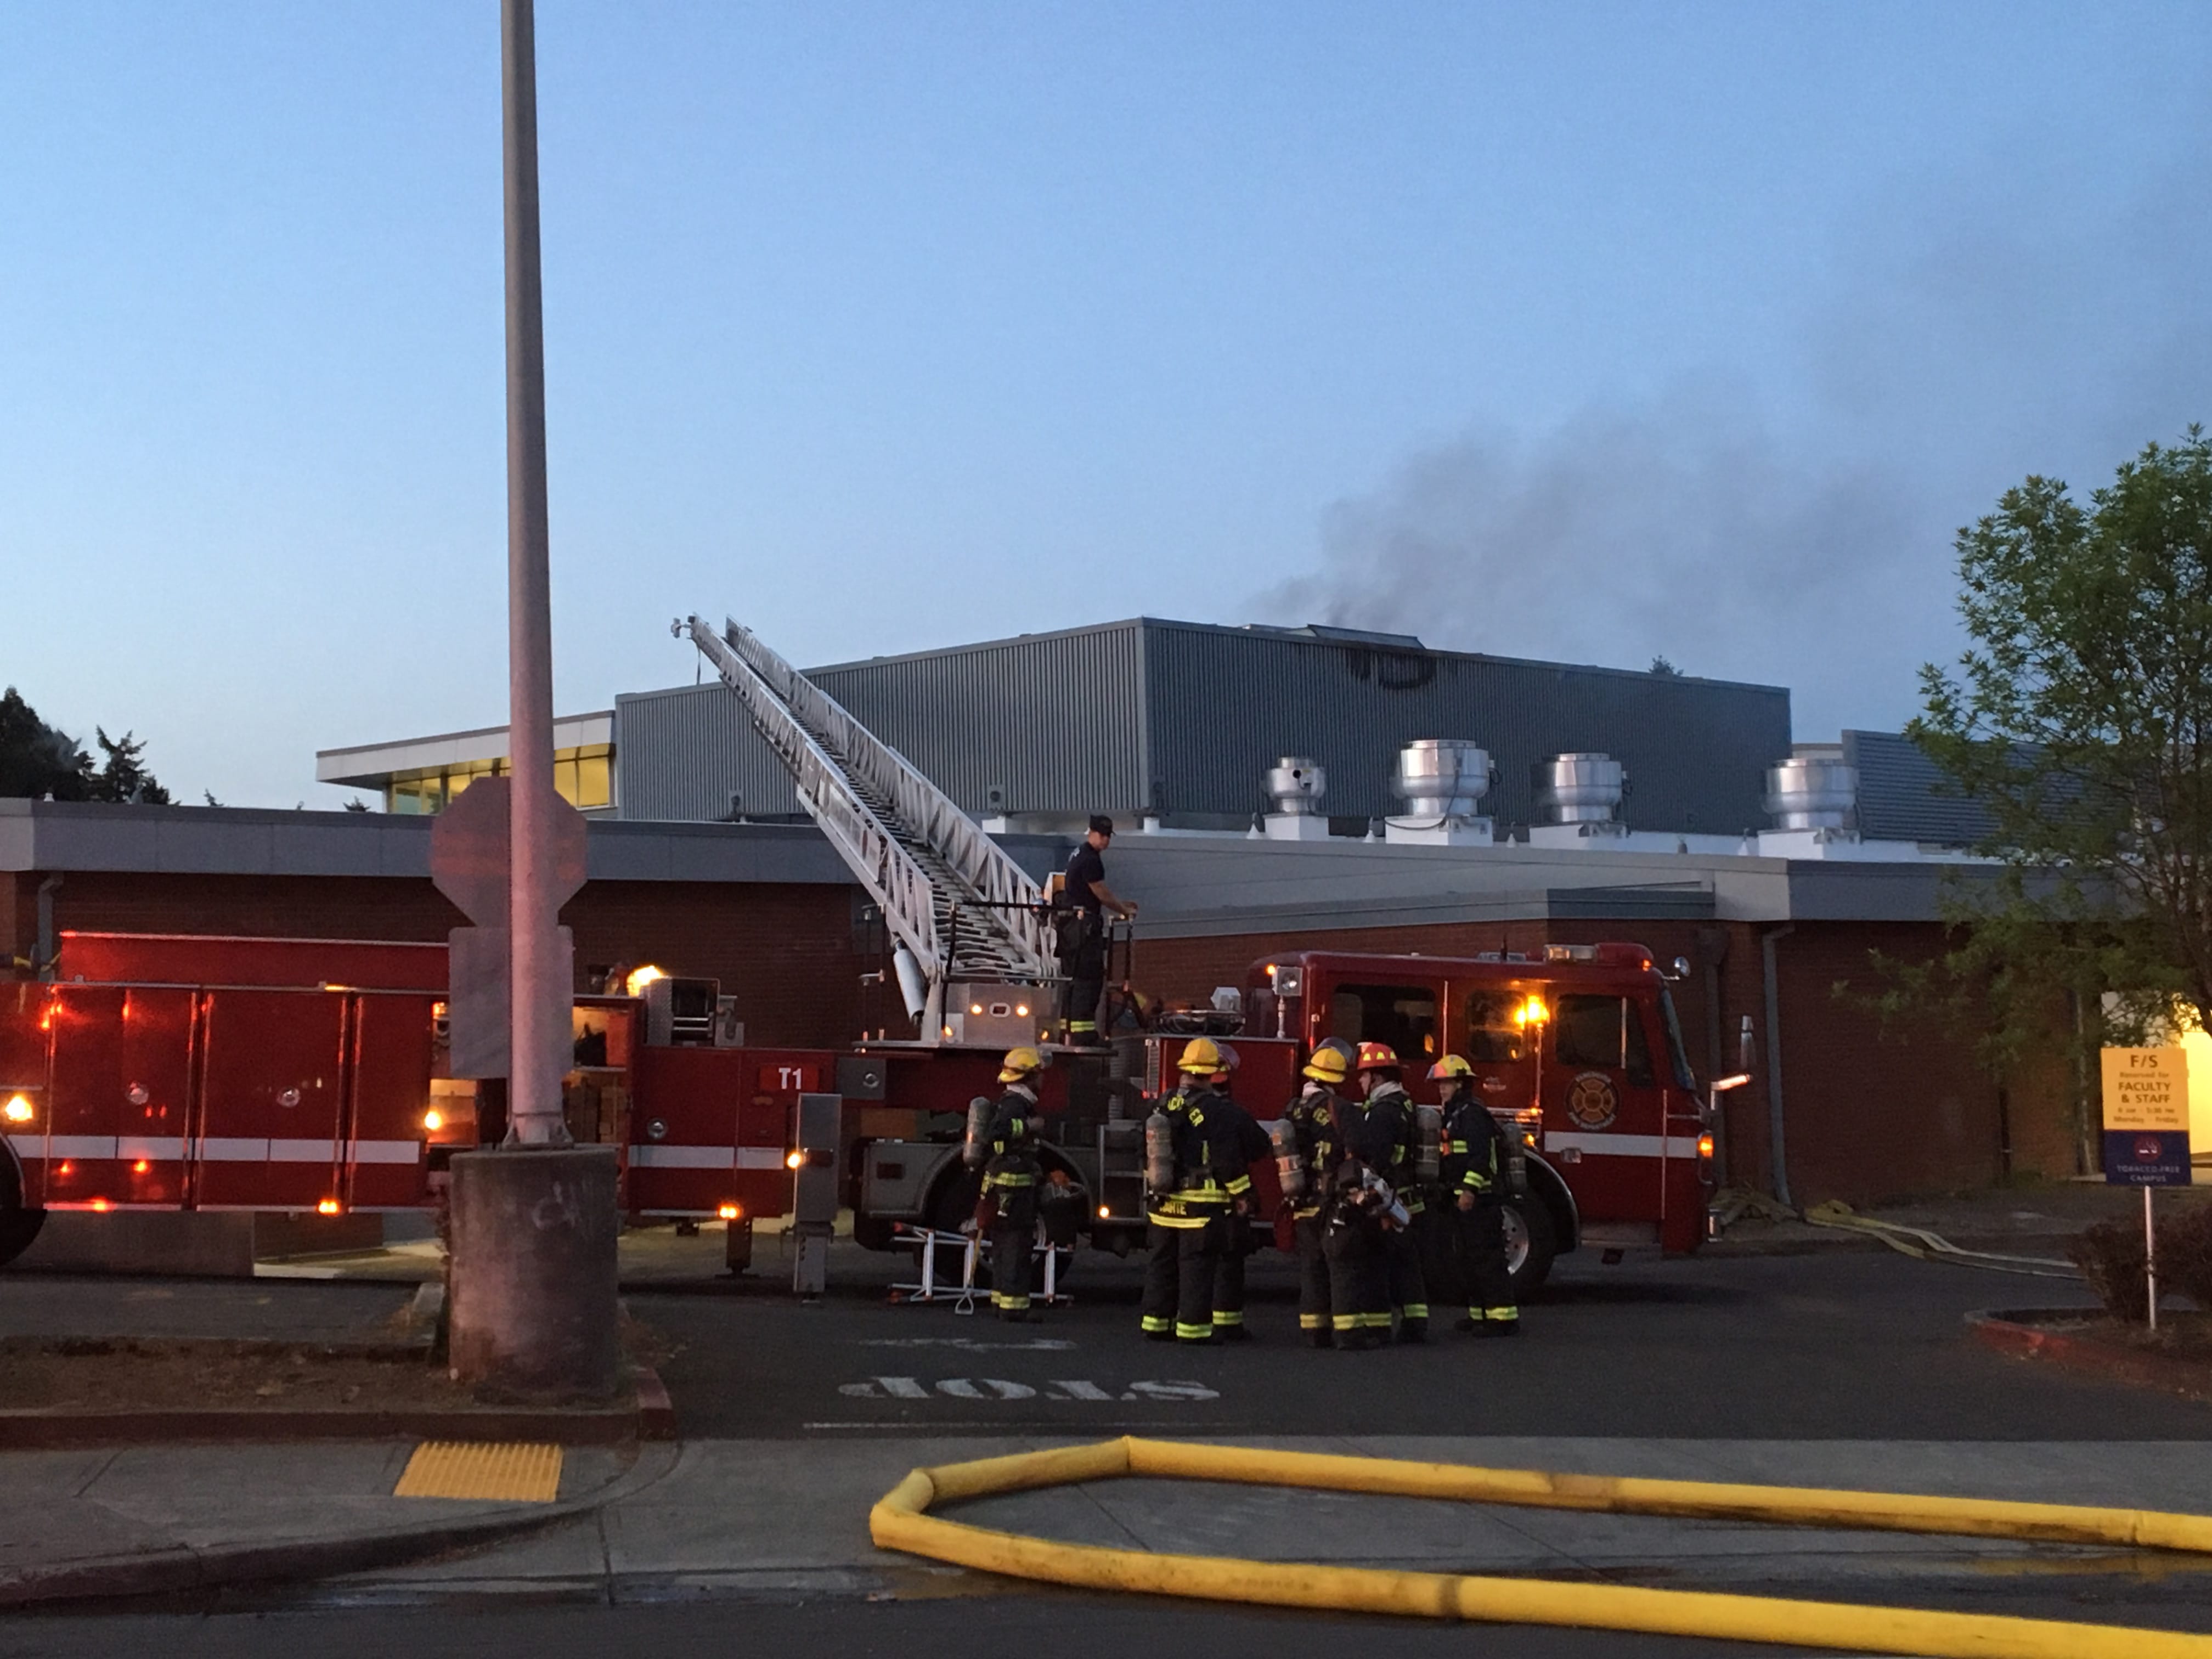 Vancouver firefighters respond to an electrical fire Monday morning on the roof of Clark College's Culinary Institute.